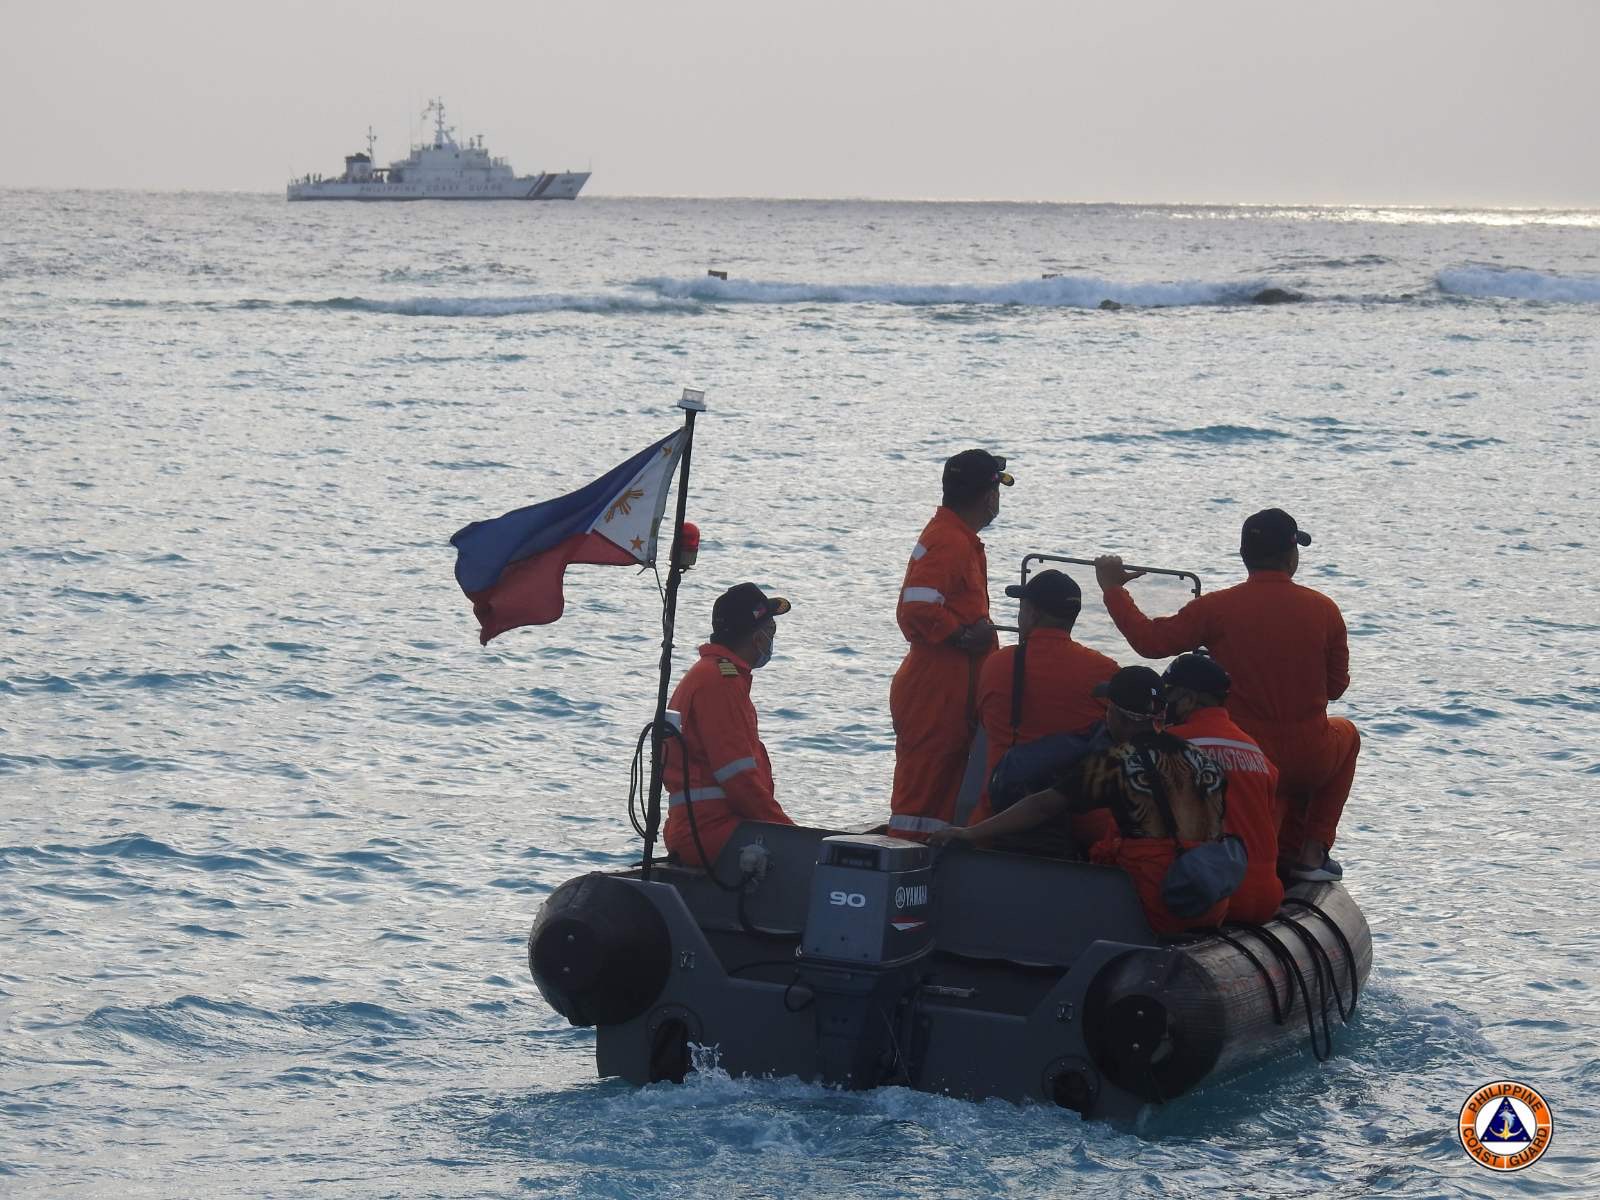 The Philippines is now prepared for a “water war” in the West Philippine  Sea as the country’s coast  guard plans to use a “white to white diplomacy” in the disputed territory.